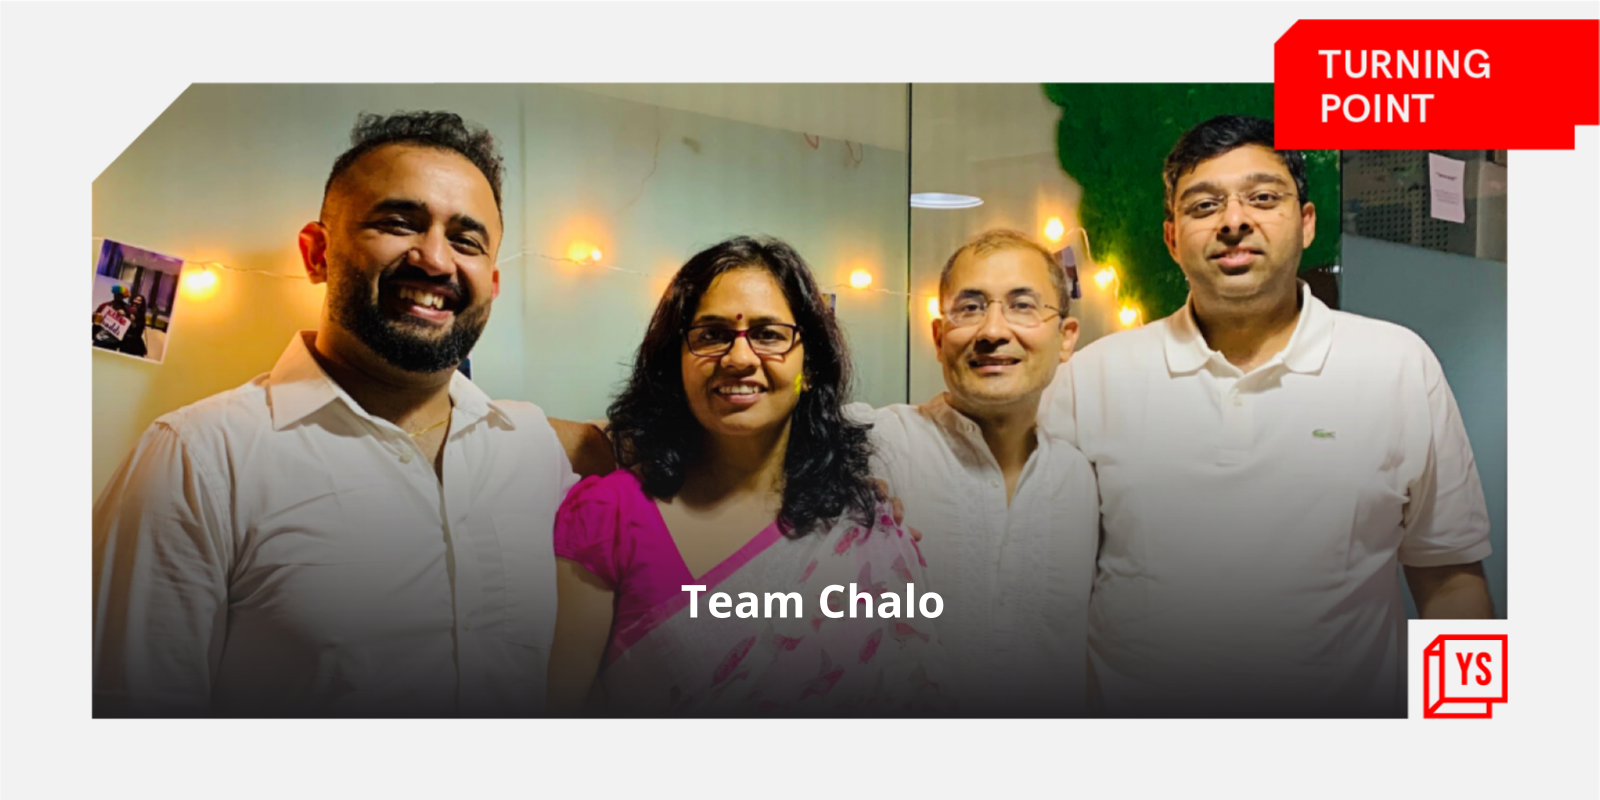 [The Turning Point] What made these entrepreneurs embark on the ‘Chalo’ journey